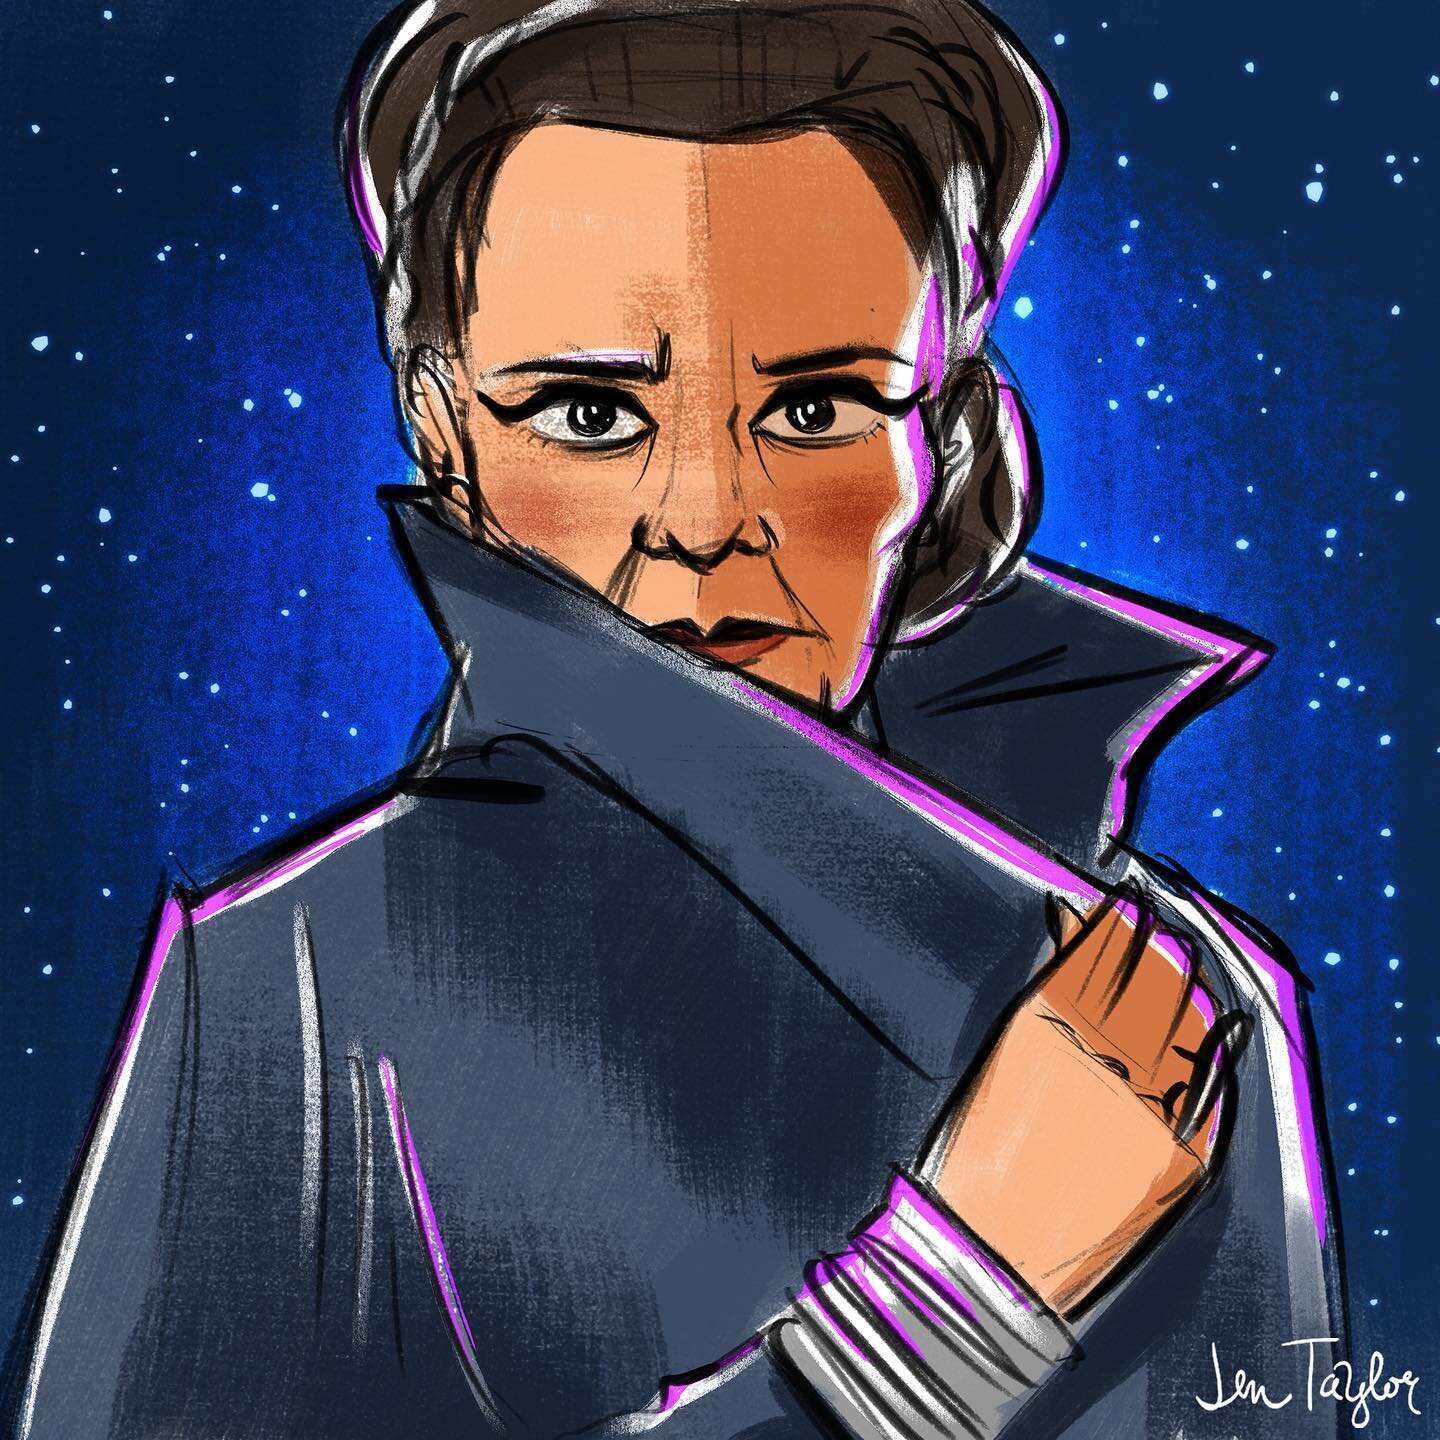 Happy birthday to the princess, general, and rebel Carrie Fisher ❤️
.
.
.
#carriefisher #princessleia #generalorgana #starwars #rebel #happybirthday #throwback #throwbackthursday #starwarsfan #fanart #starwarsfanart #thursday